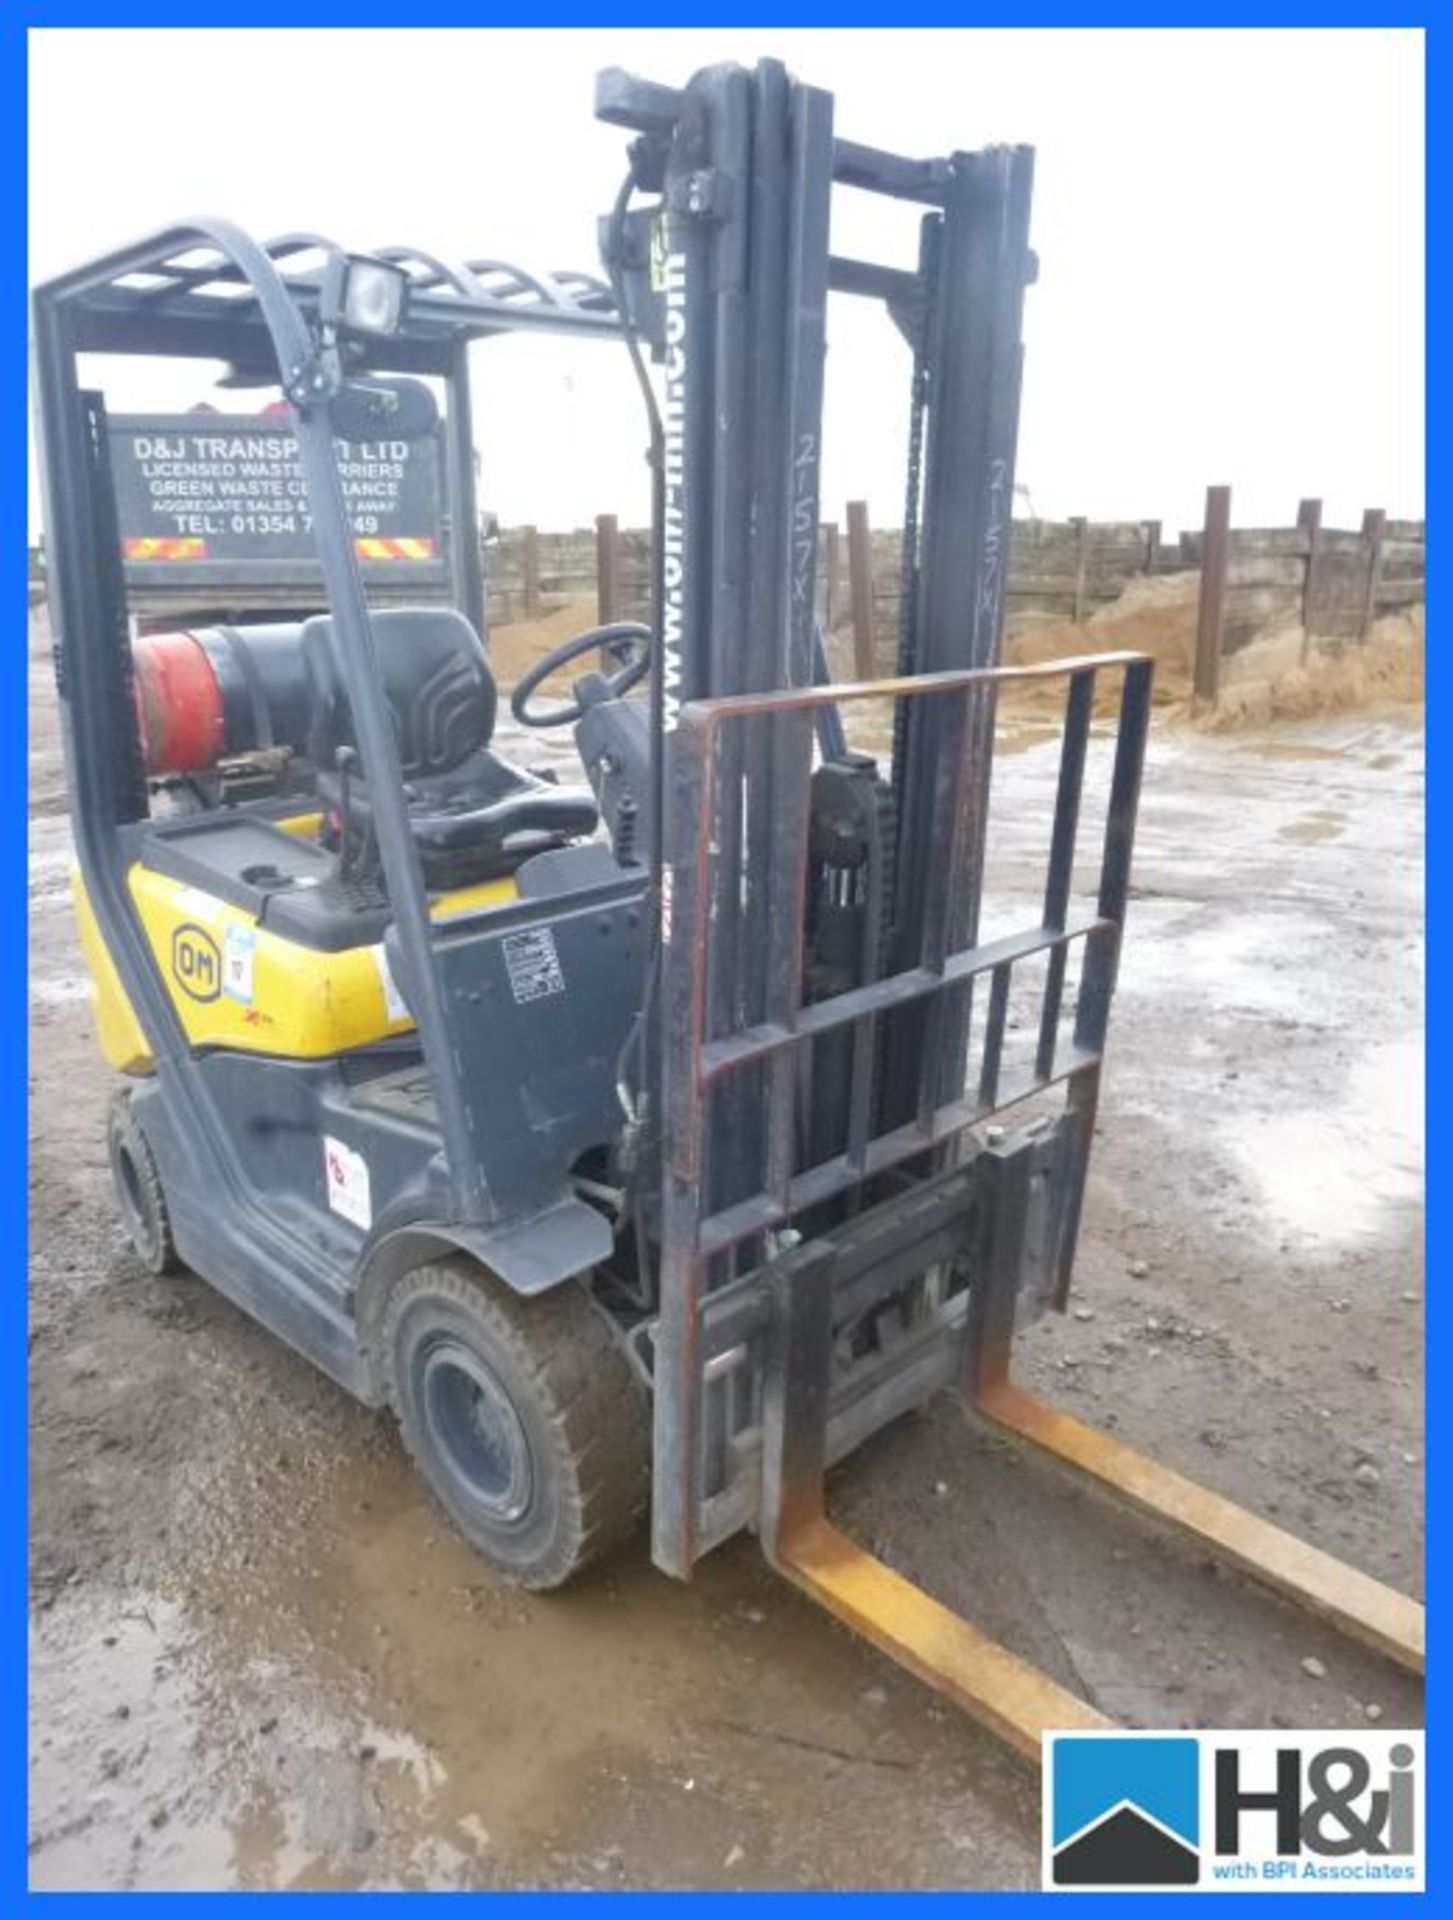 OM XG15. 1500 kg Gas forklift. Side shift. Double mast. HOURS 9370.4. In working order. Viewing - Image 2 of 7